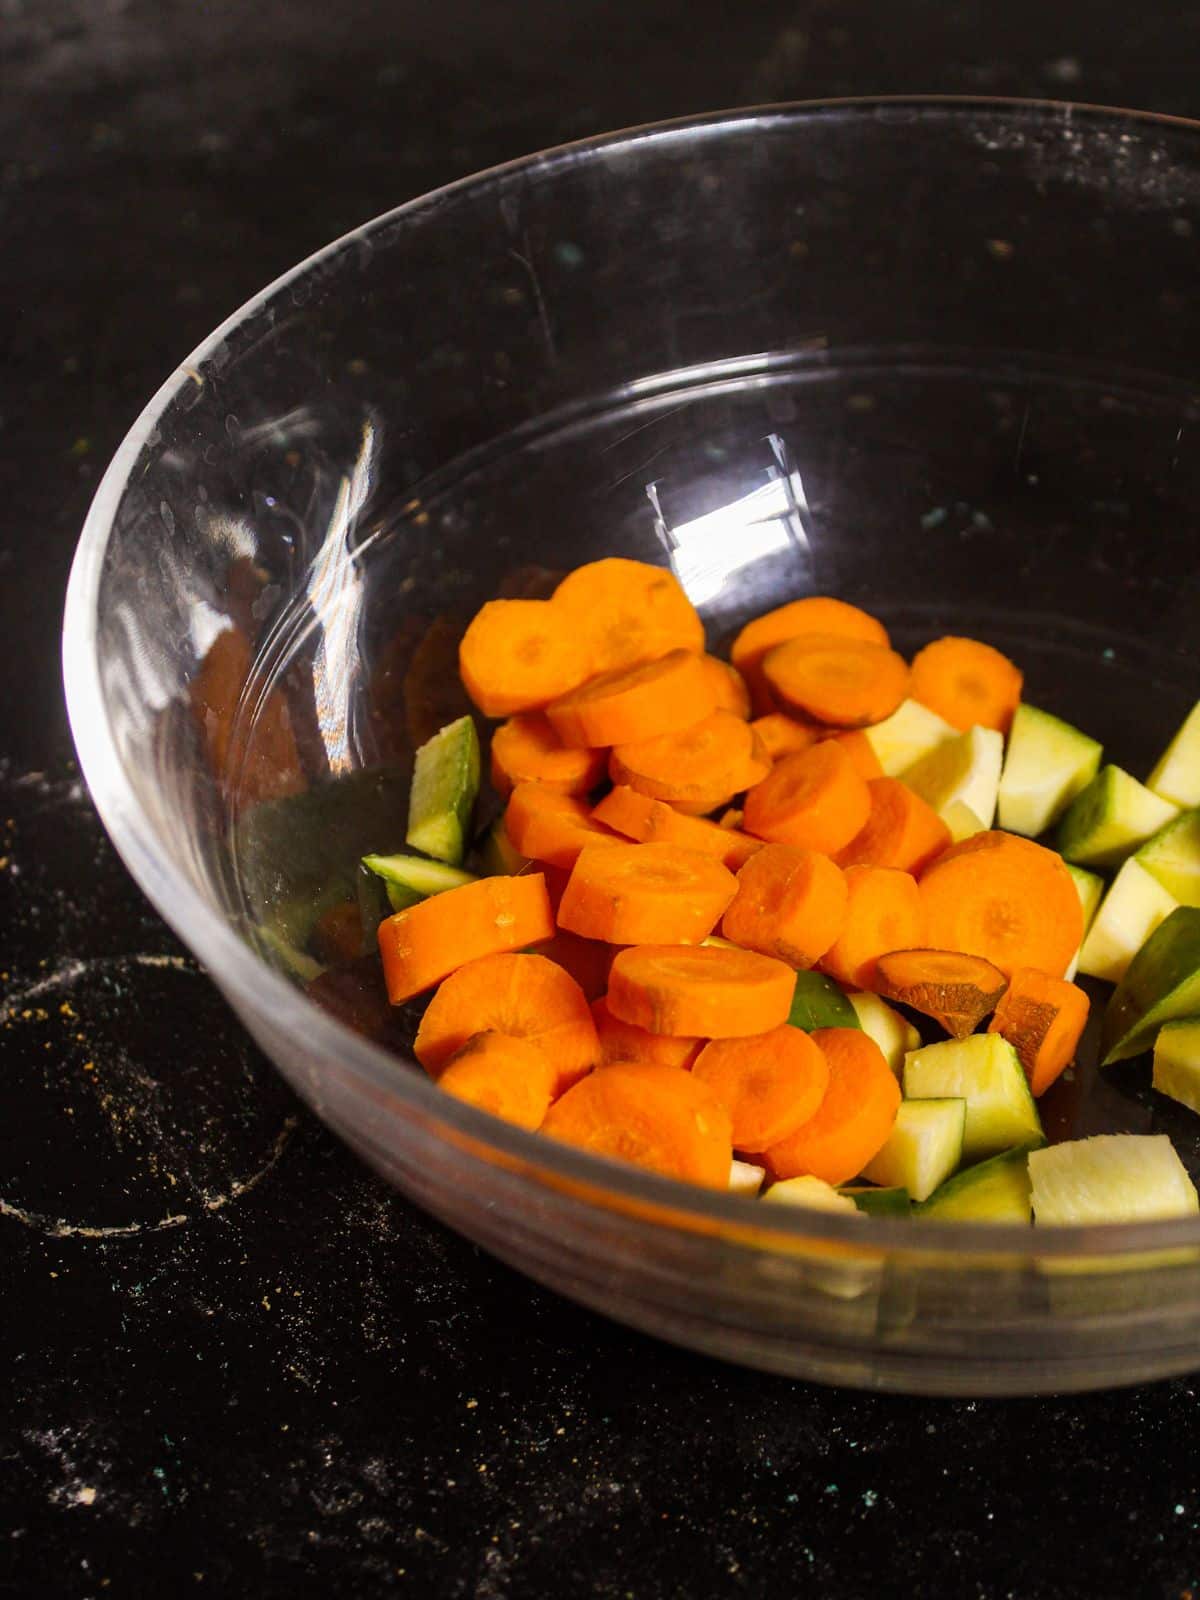 Add chopped carrots into the bowl 